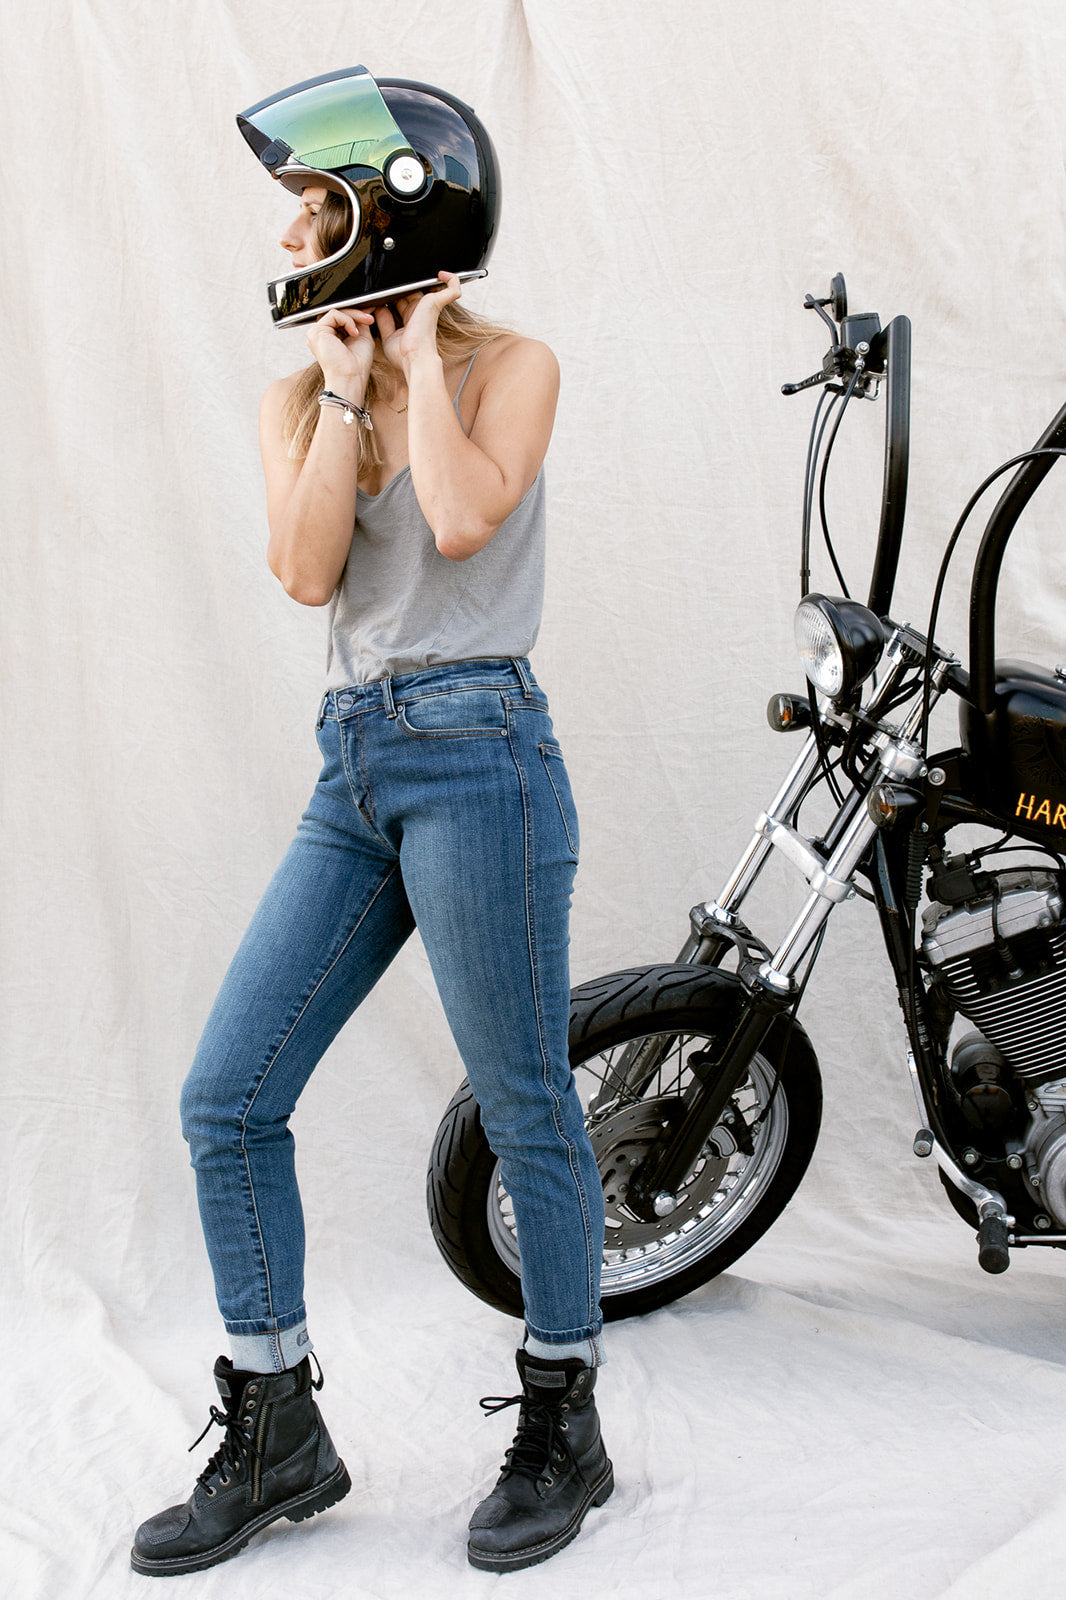 Womens Slim Fit Motorcycle Tight Jeans For Women With Stretchy Denim And  Pencil Pants Plus Size Available From Yting, $19.76